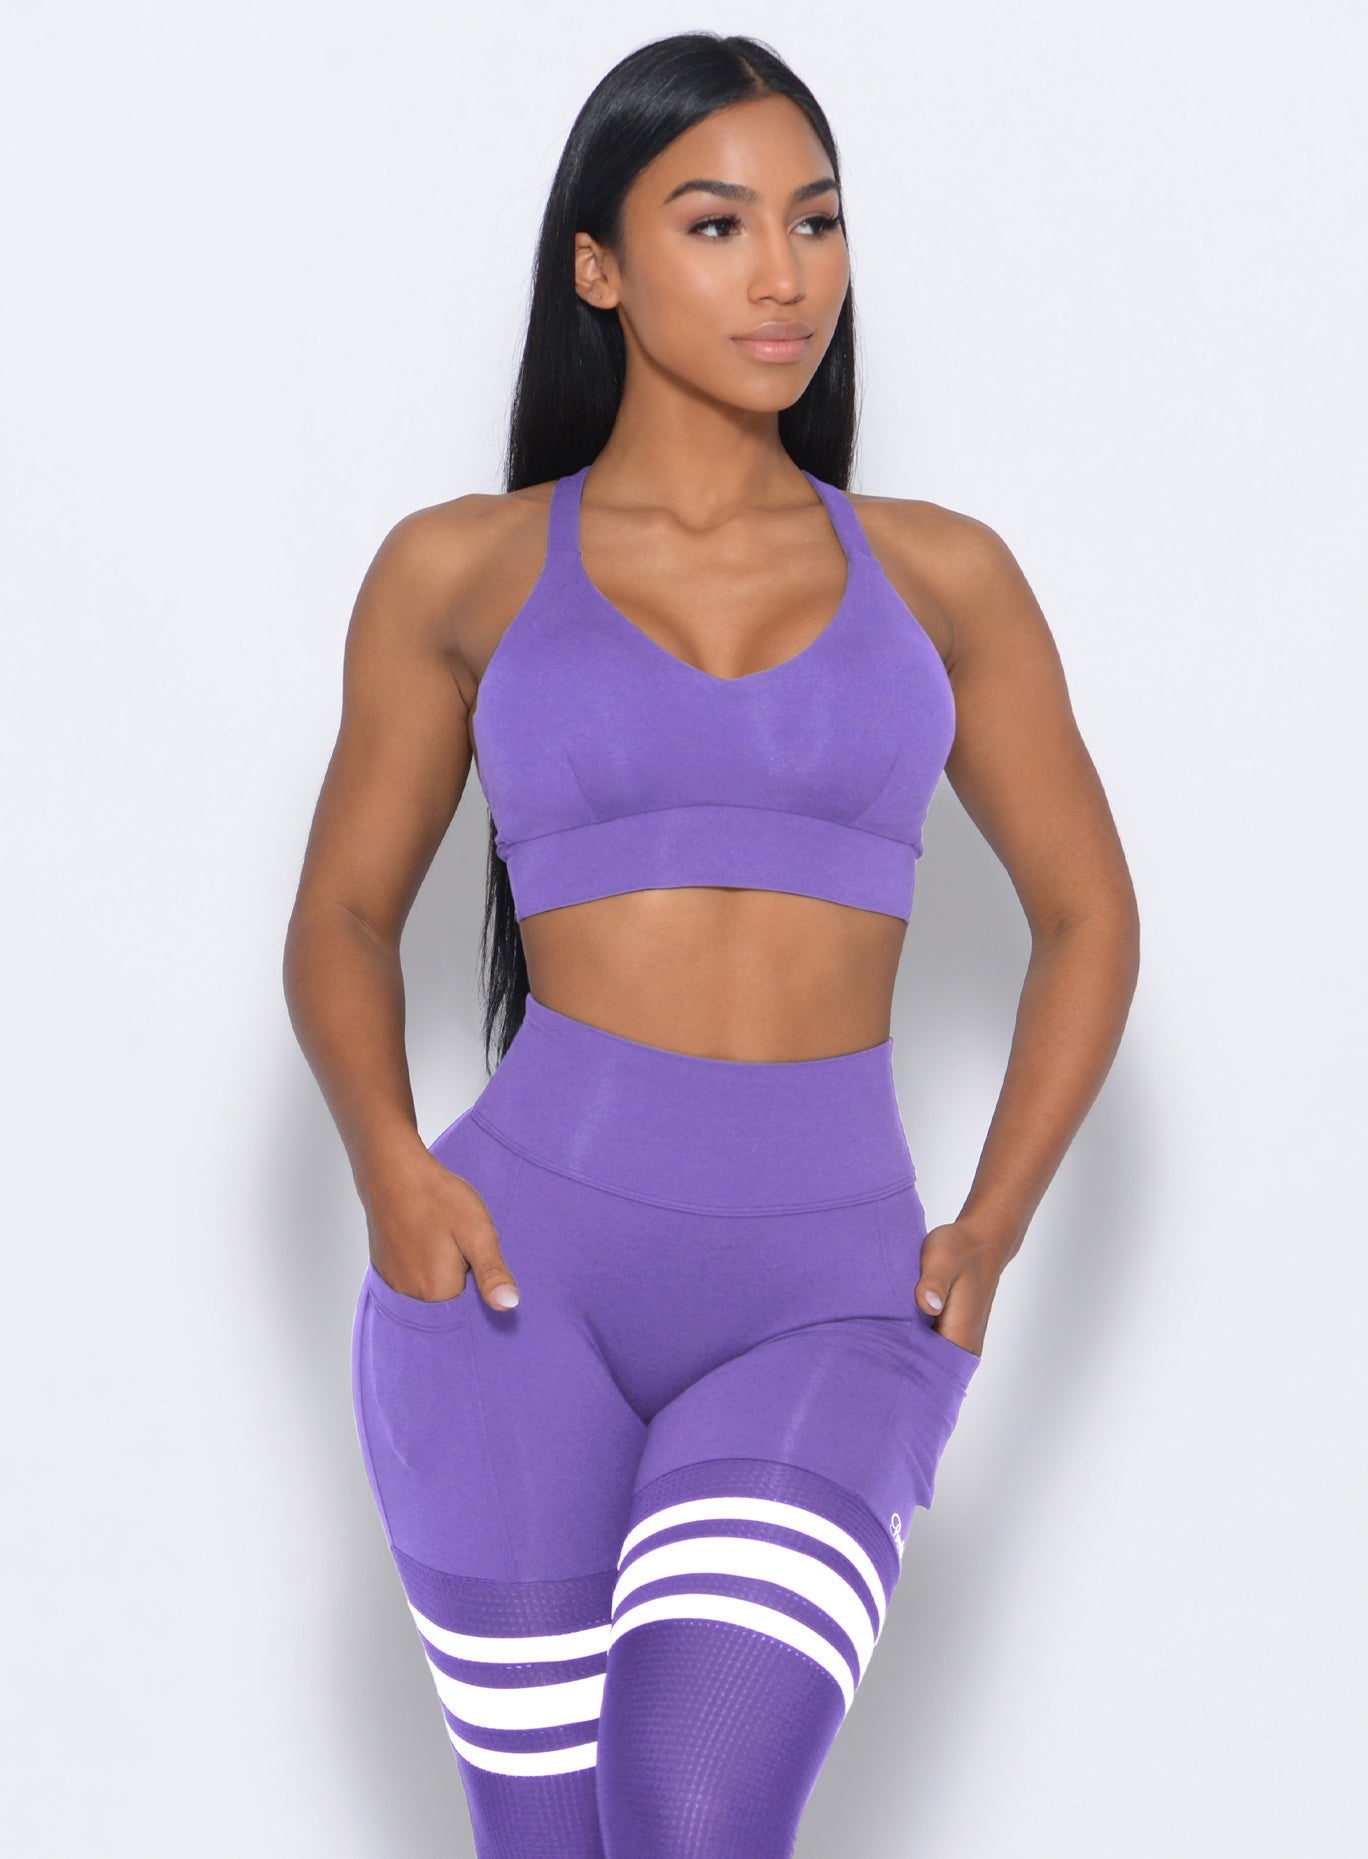 Front profile view of the model in our synergy sports bra in royal purple color and a matching high waist leggings